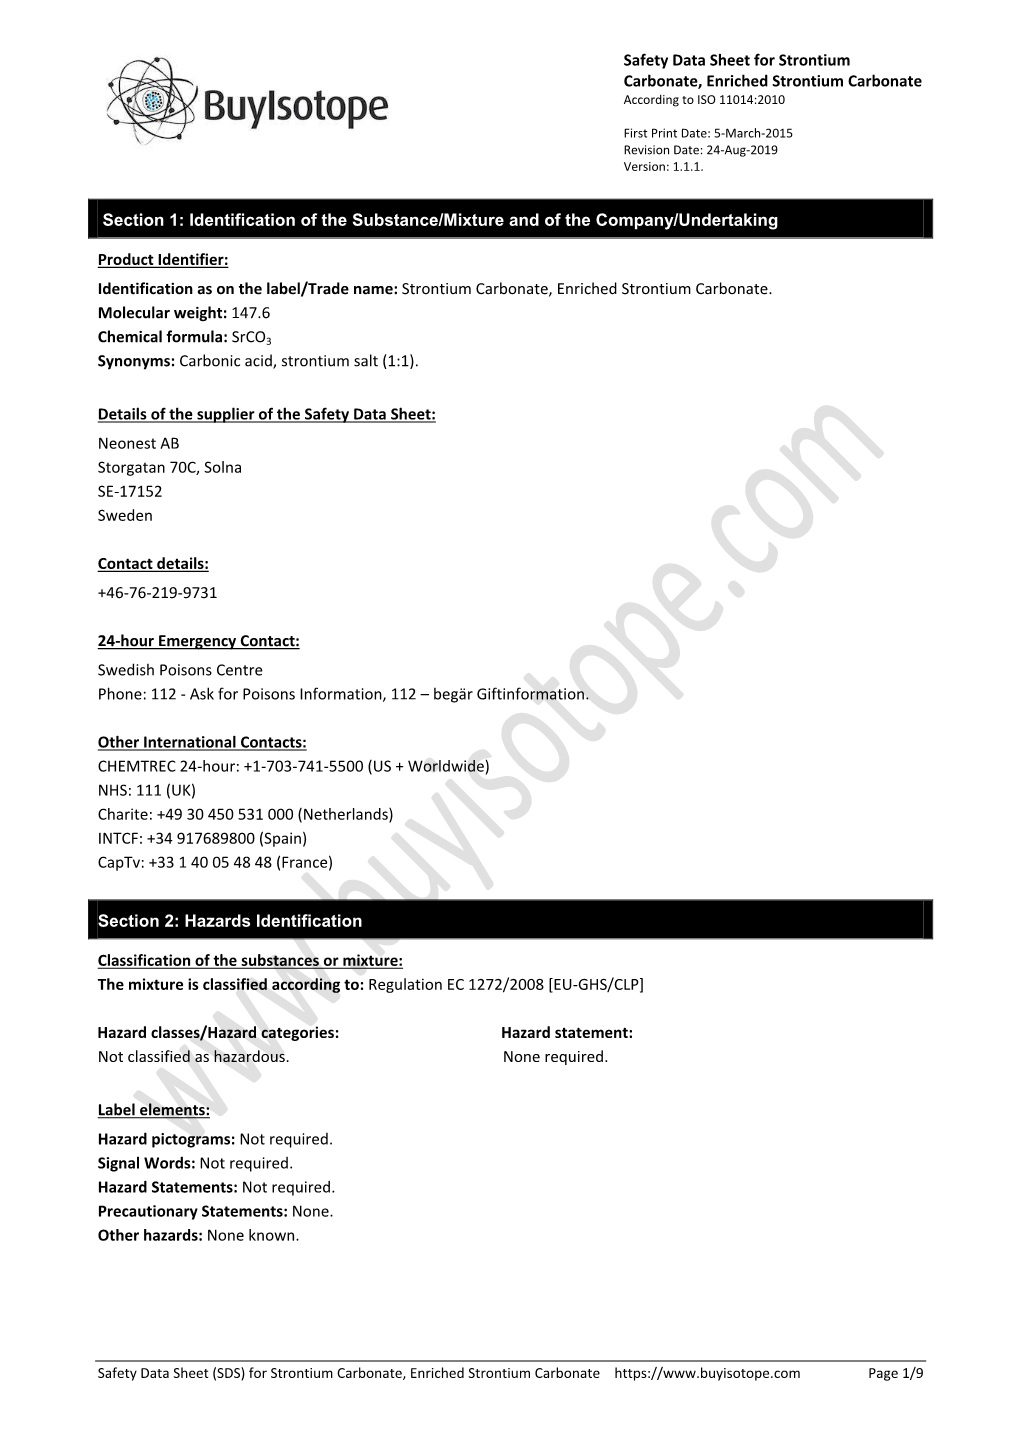 Safety Data Sheet for Strontium Carbonate, Enriched Strontium Carbonate According to ISO 11014:2010